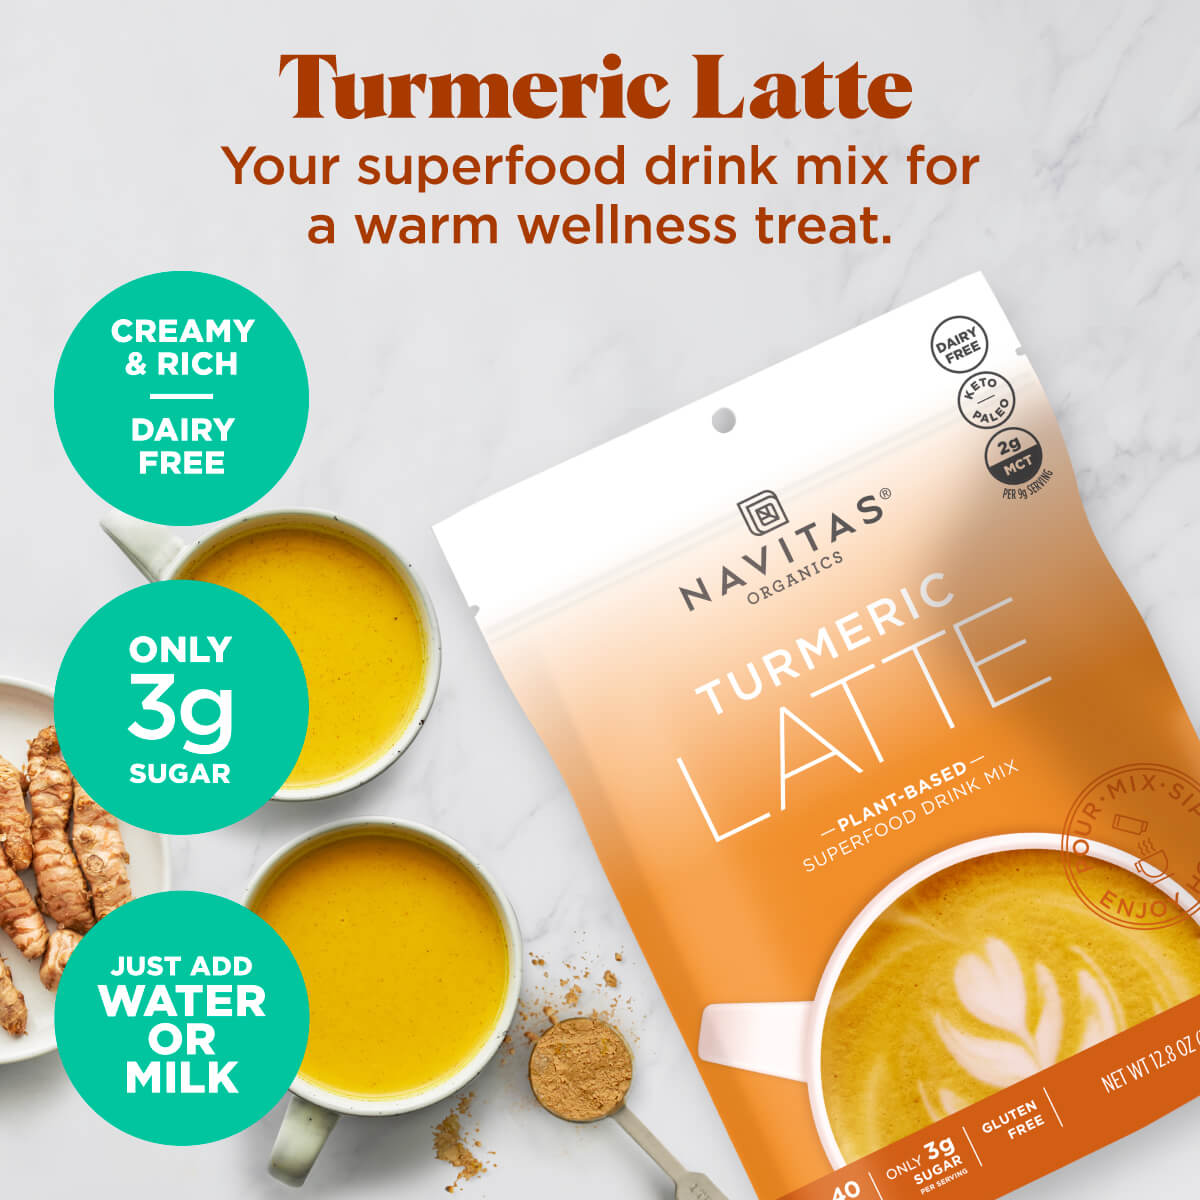 Navitas Organics Turmeric Latte is your superfood drink mix for a warm wellness treat. Creamy & rich, it's dairy-free and has only 3g sugar. Just add water or milk and enjoy!